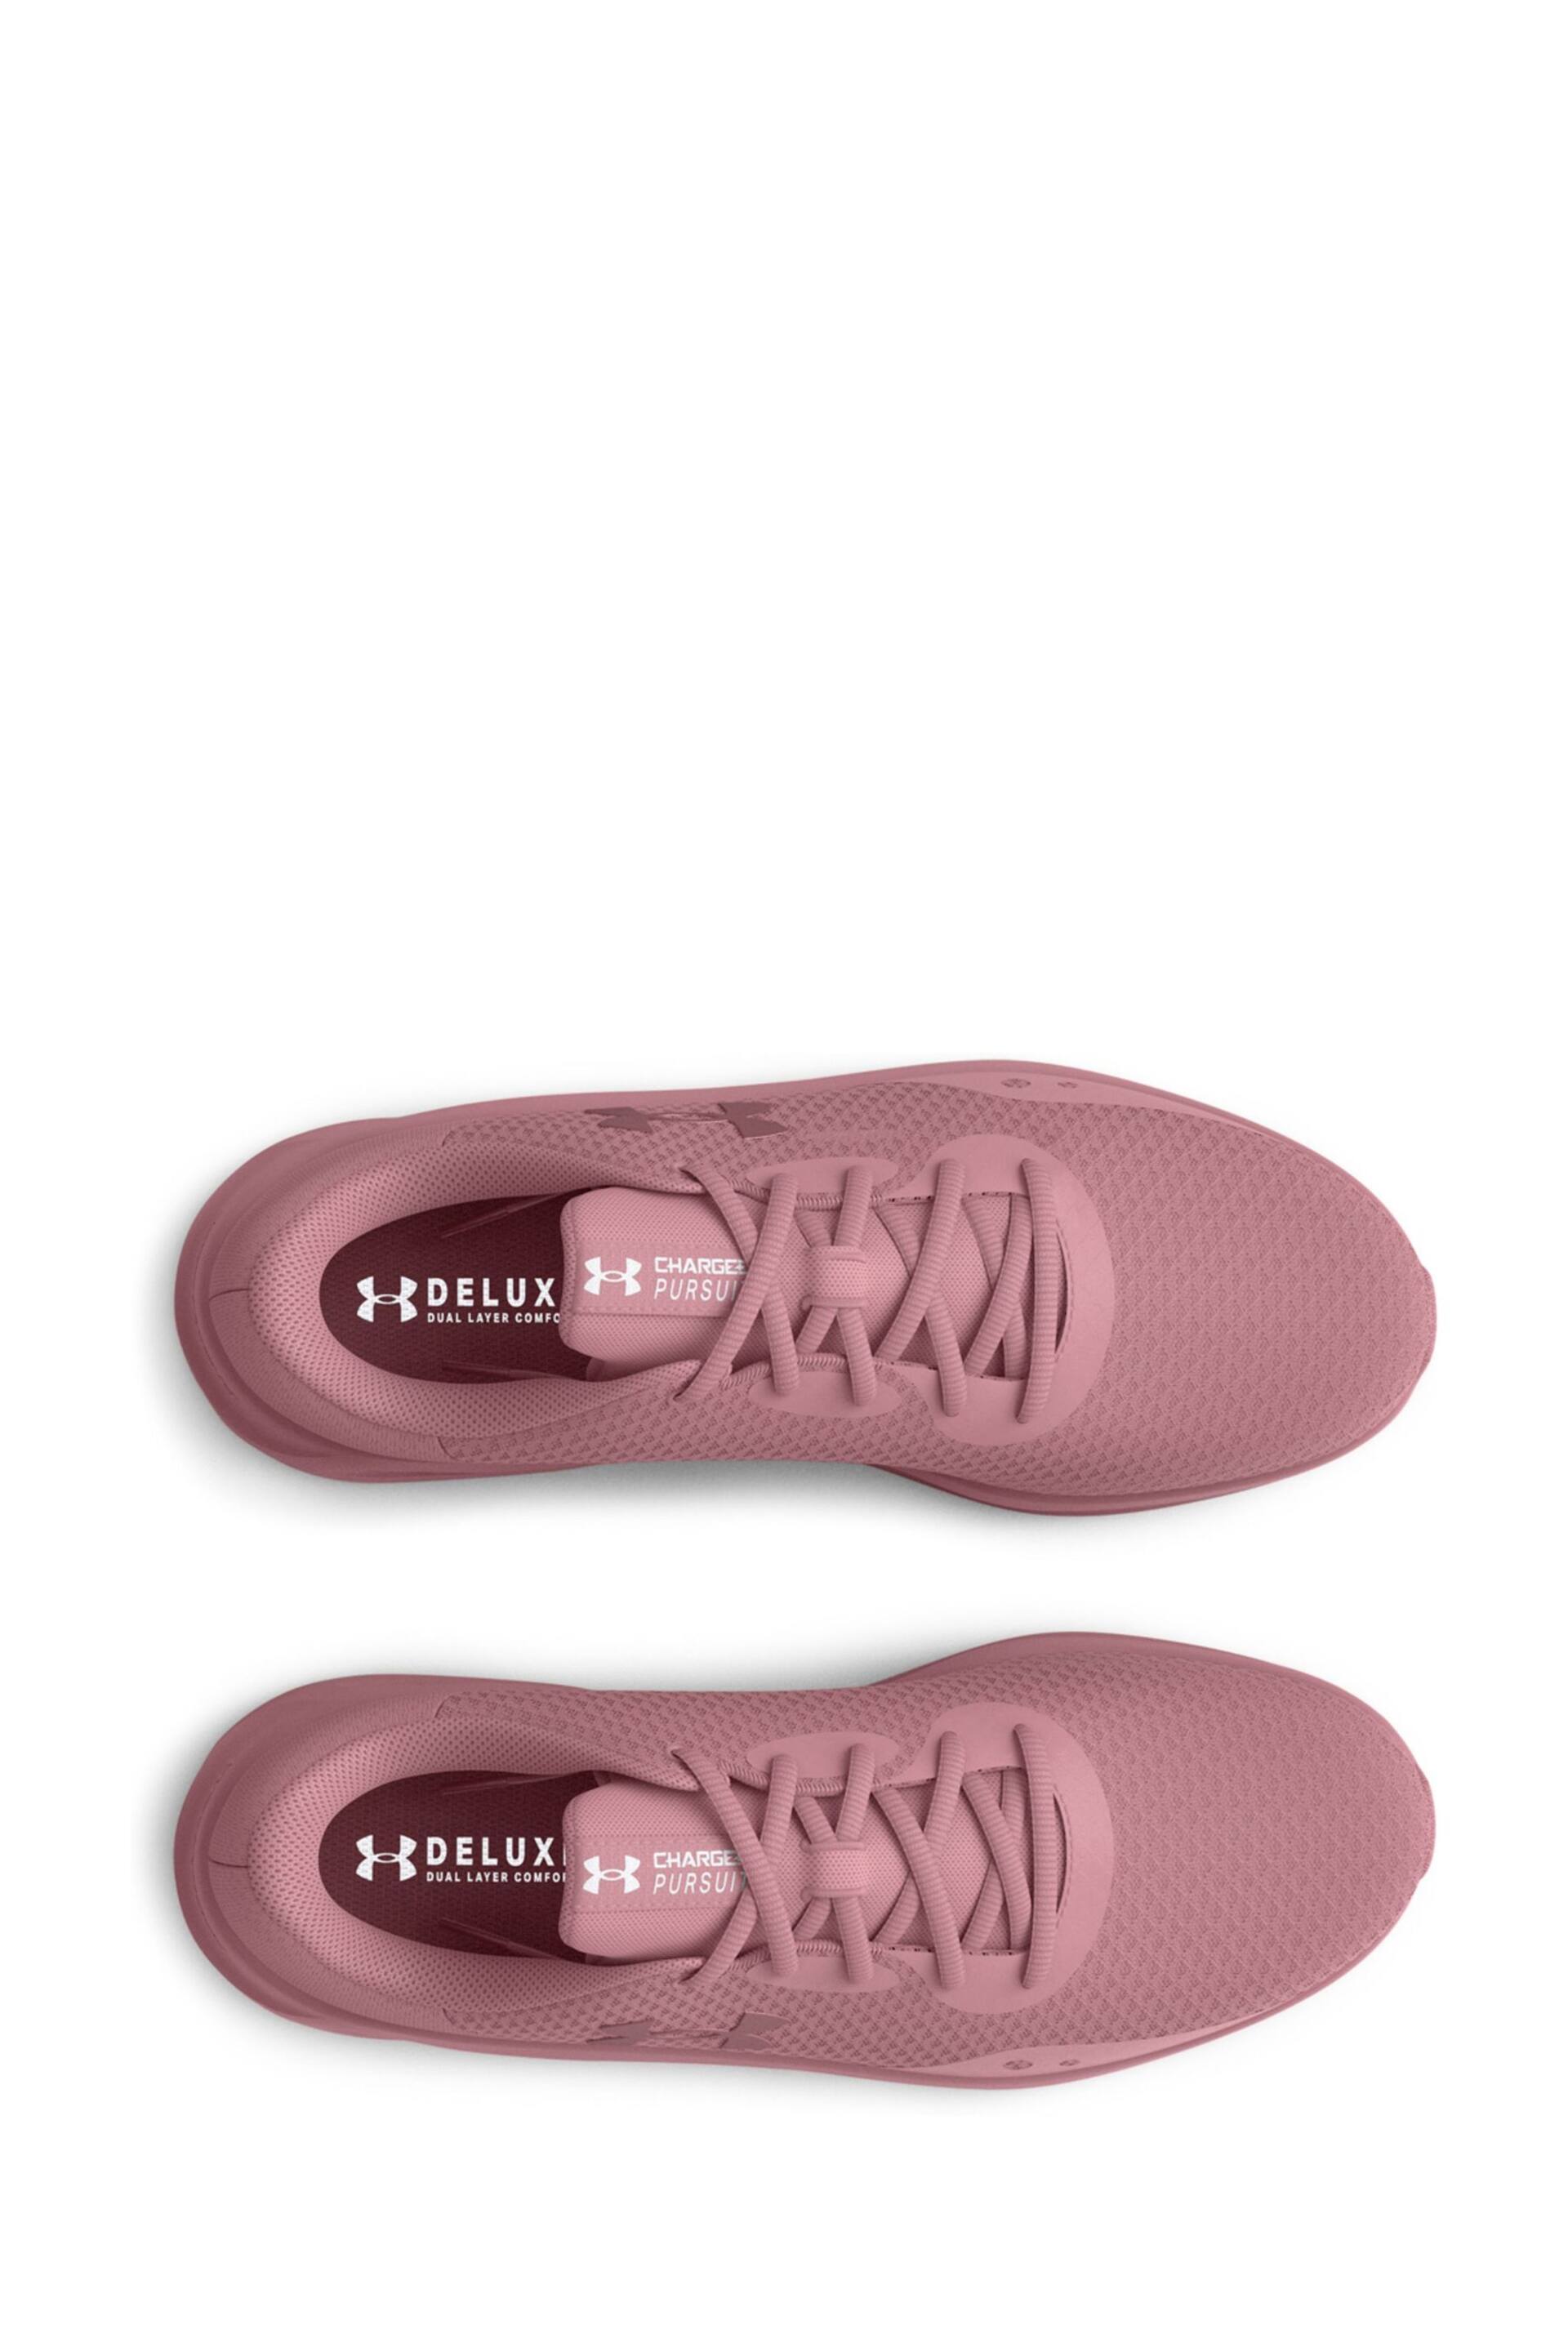 Under Armour Pink Charged Pursuit 3 Trainers - Image 4 of 5